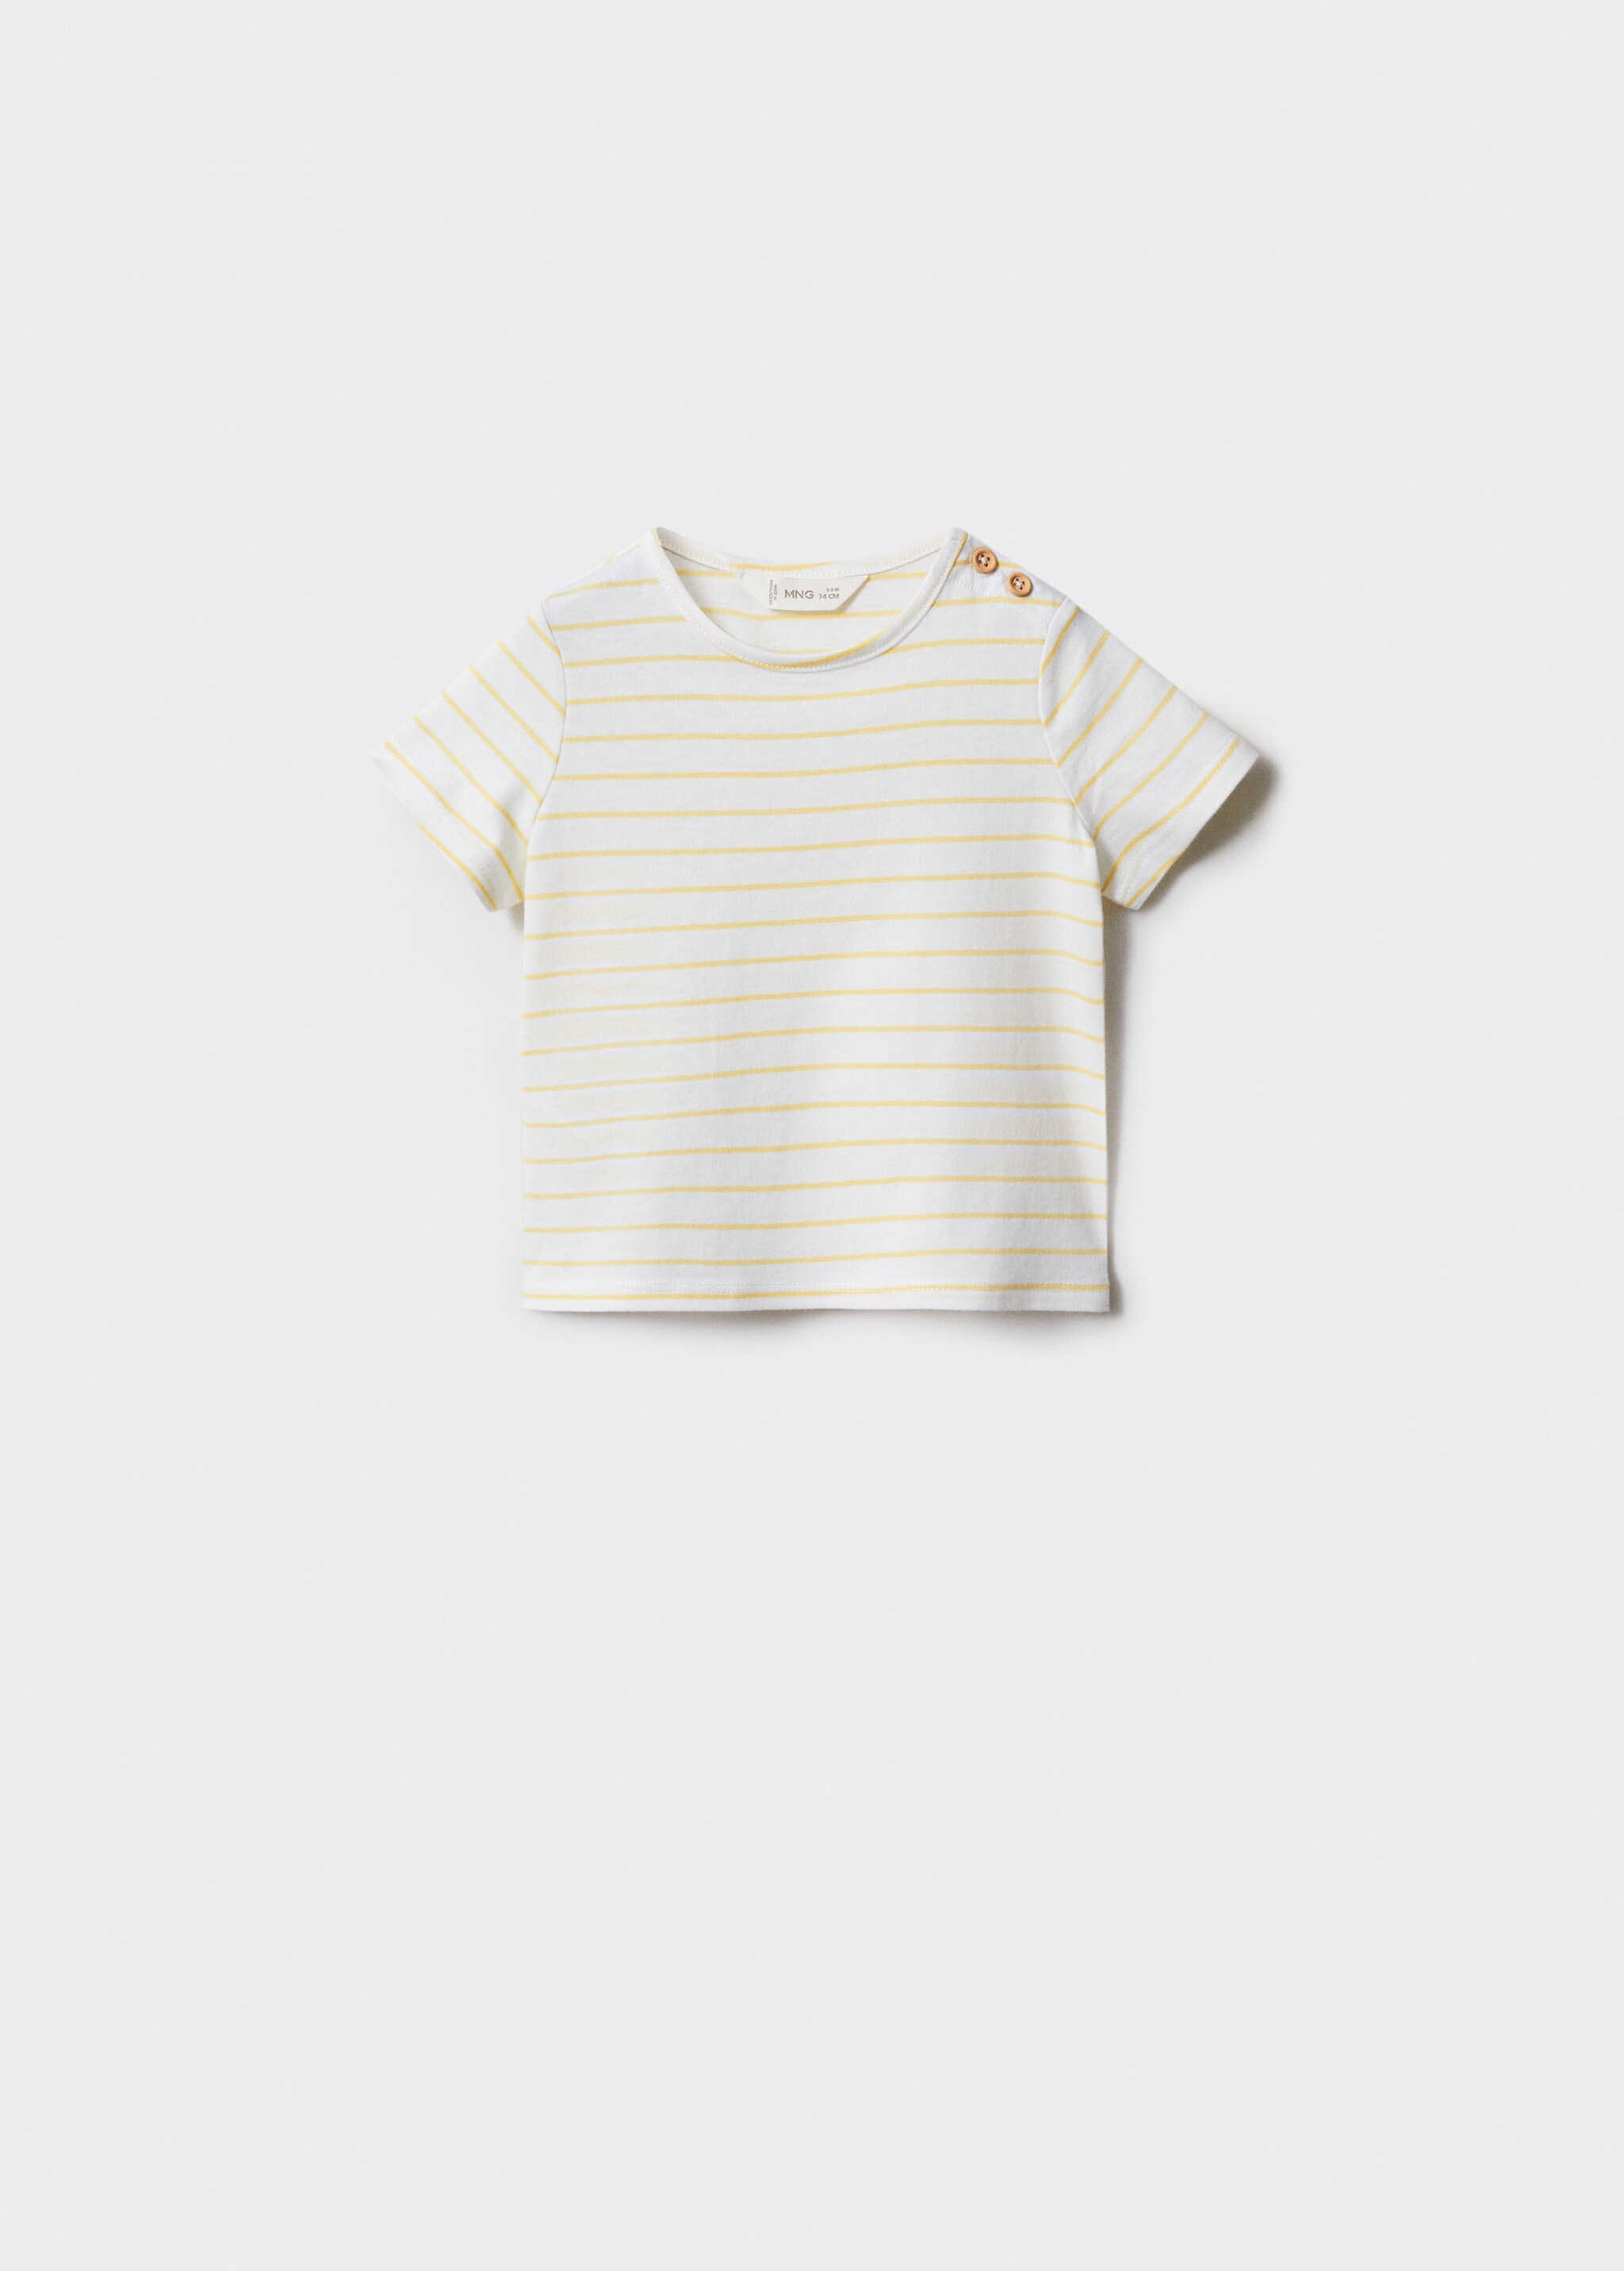 Buttoned striped T-shirt - Article without model